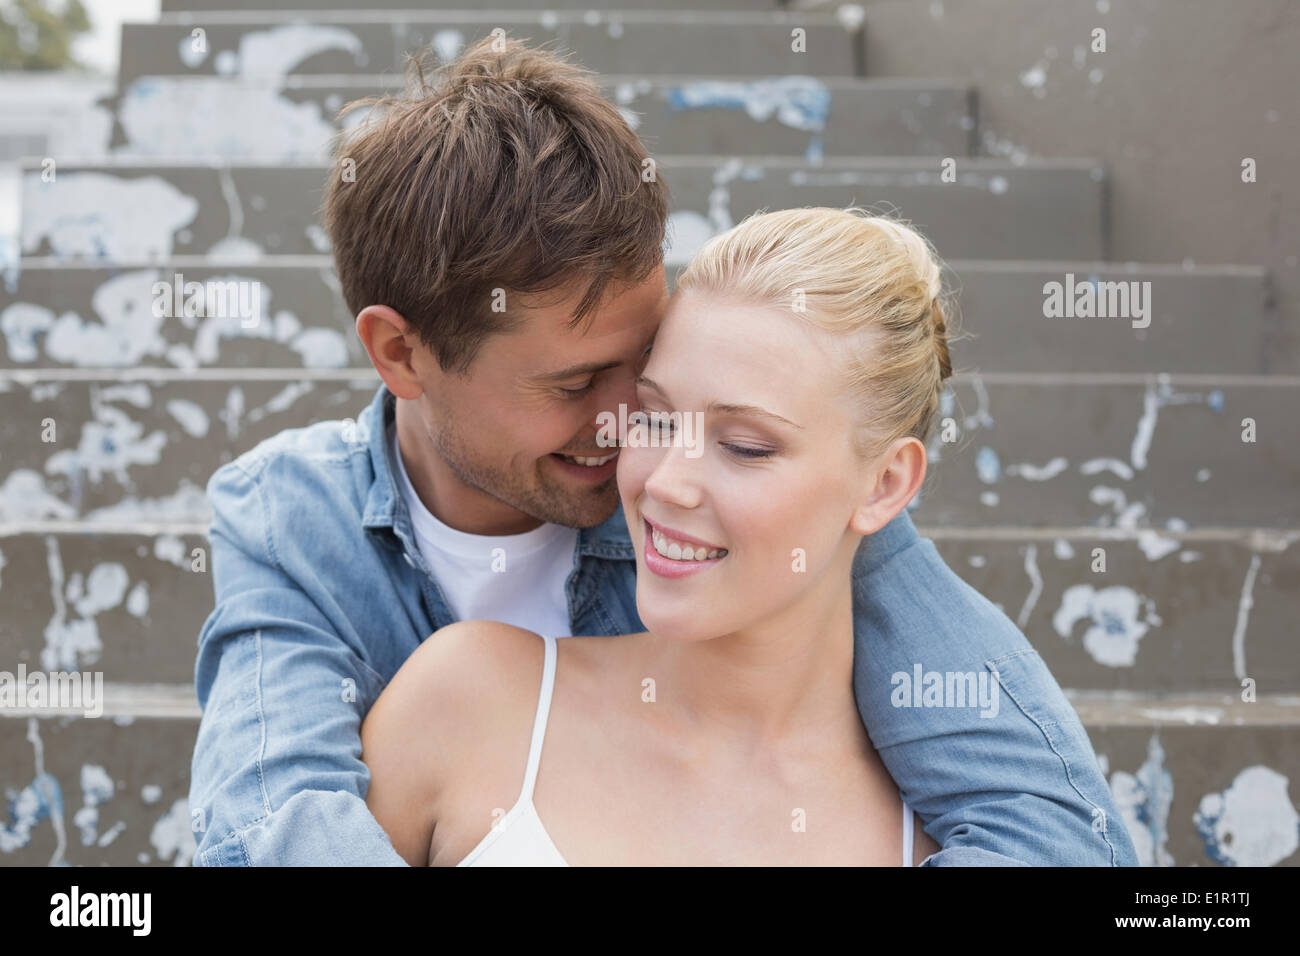 Hip young couple sitting on steps showing affection Stock Photo